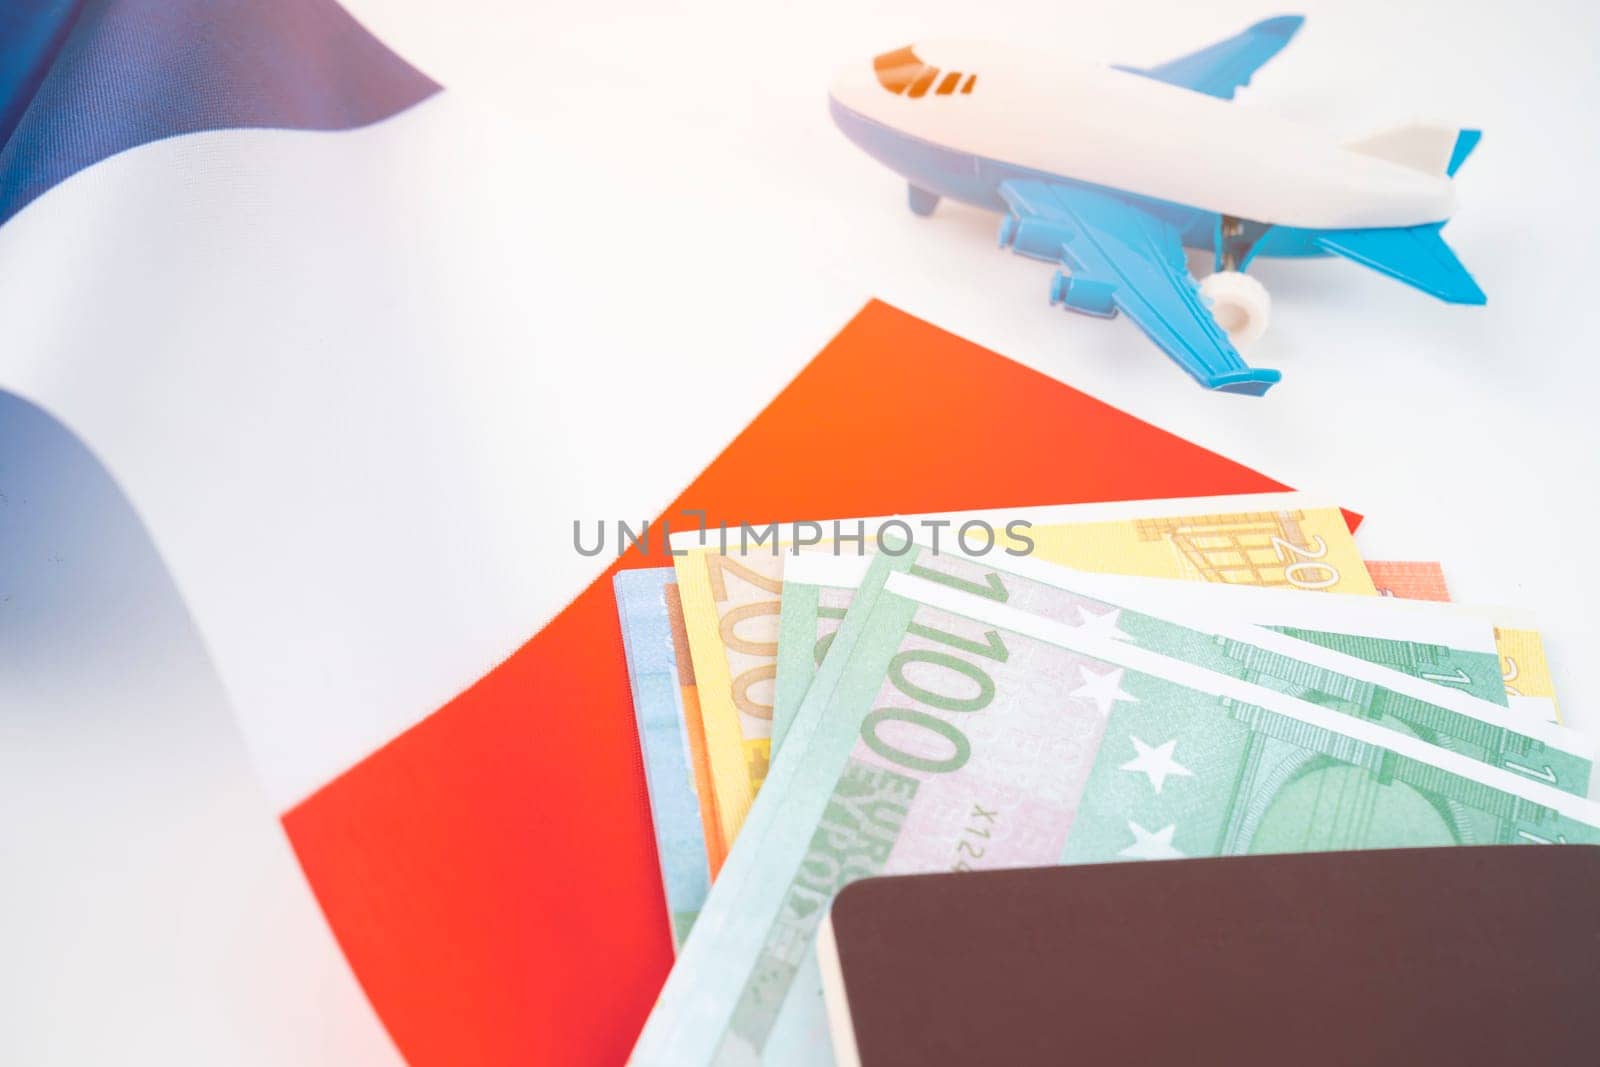 Euro banknotes and passport on France flag with airplane toy. Travel planning concept .